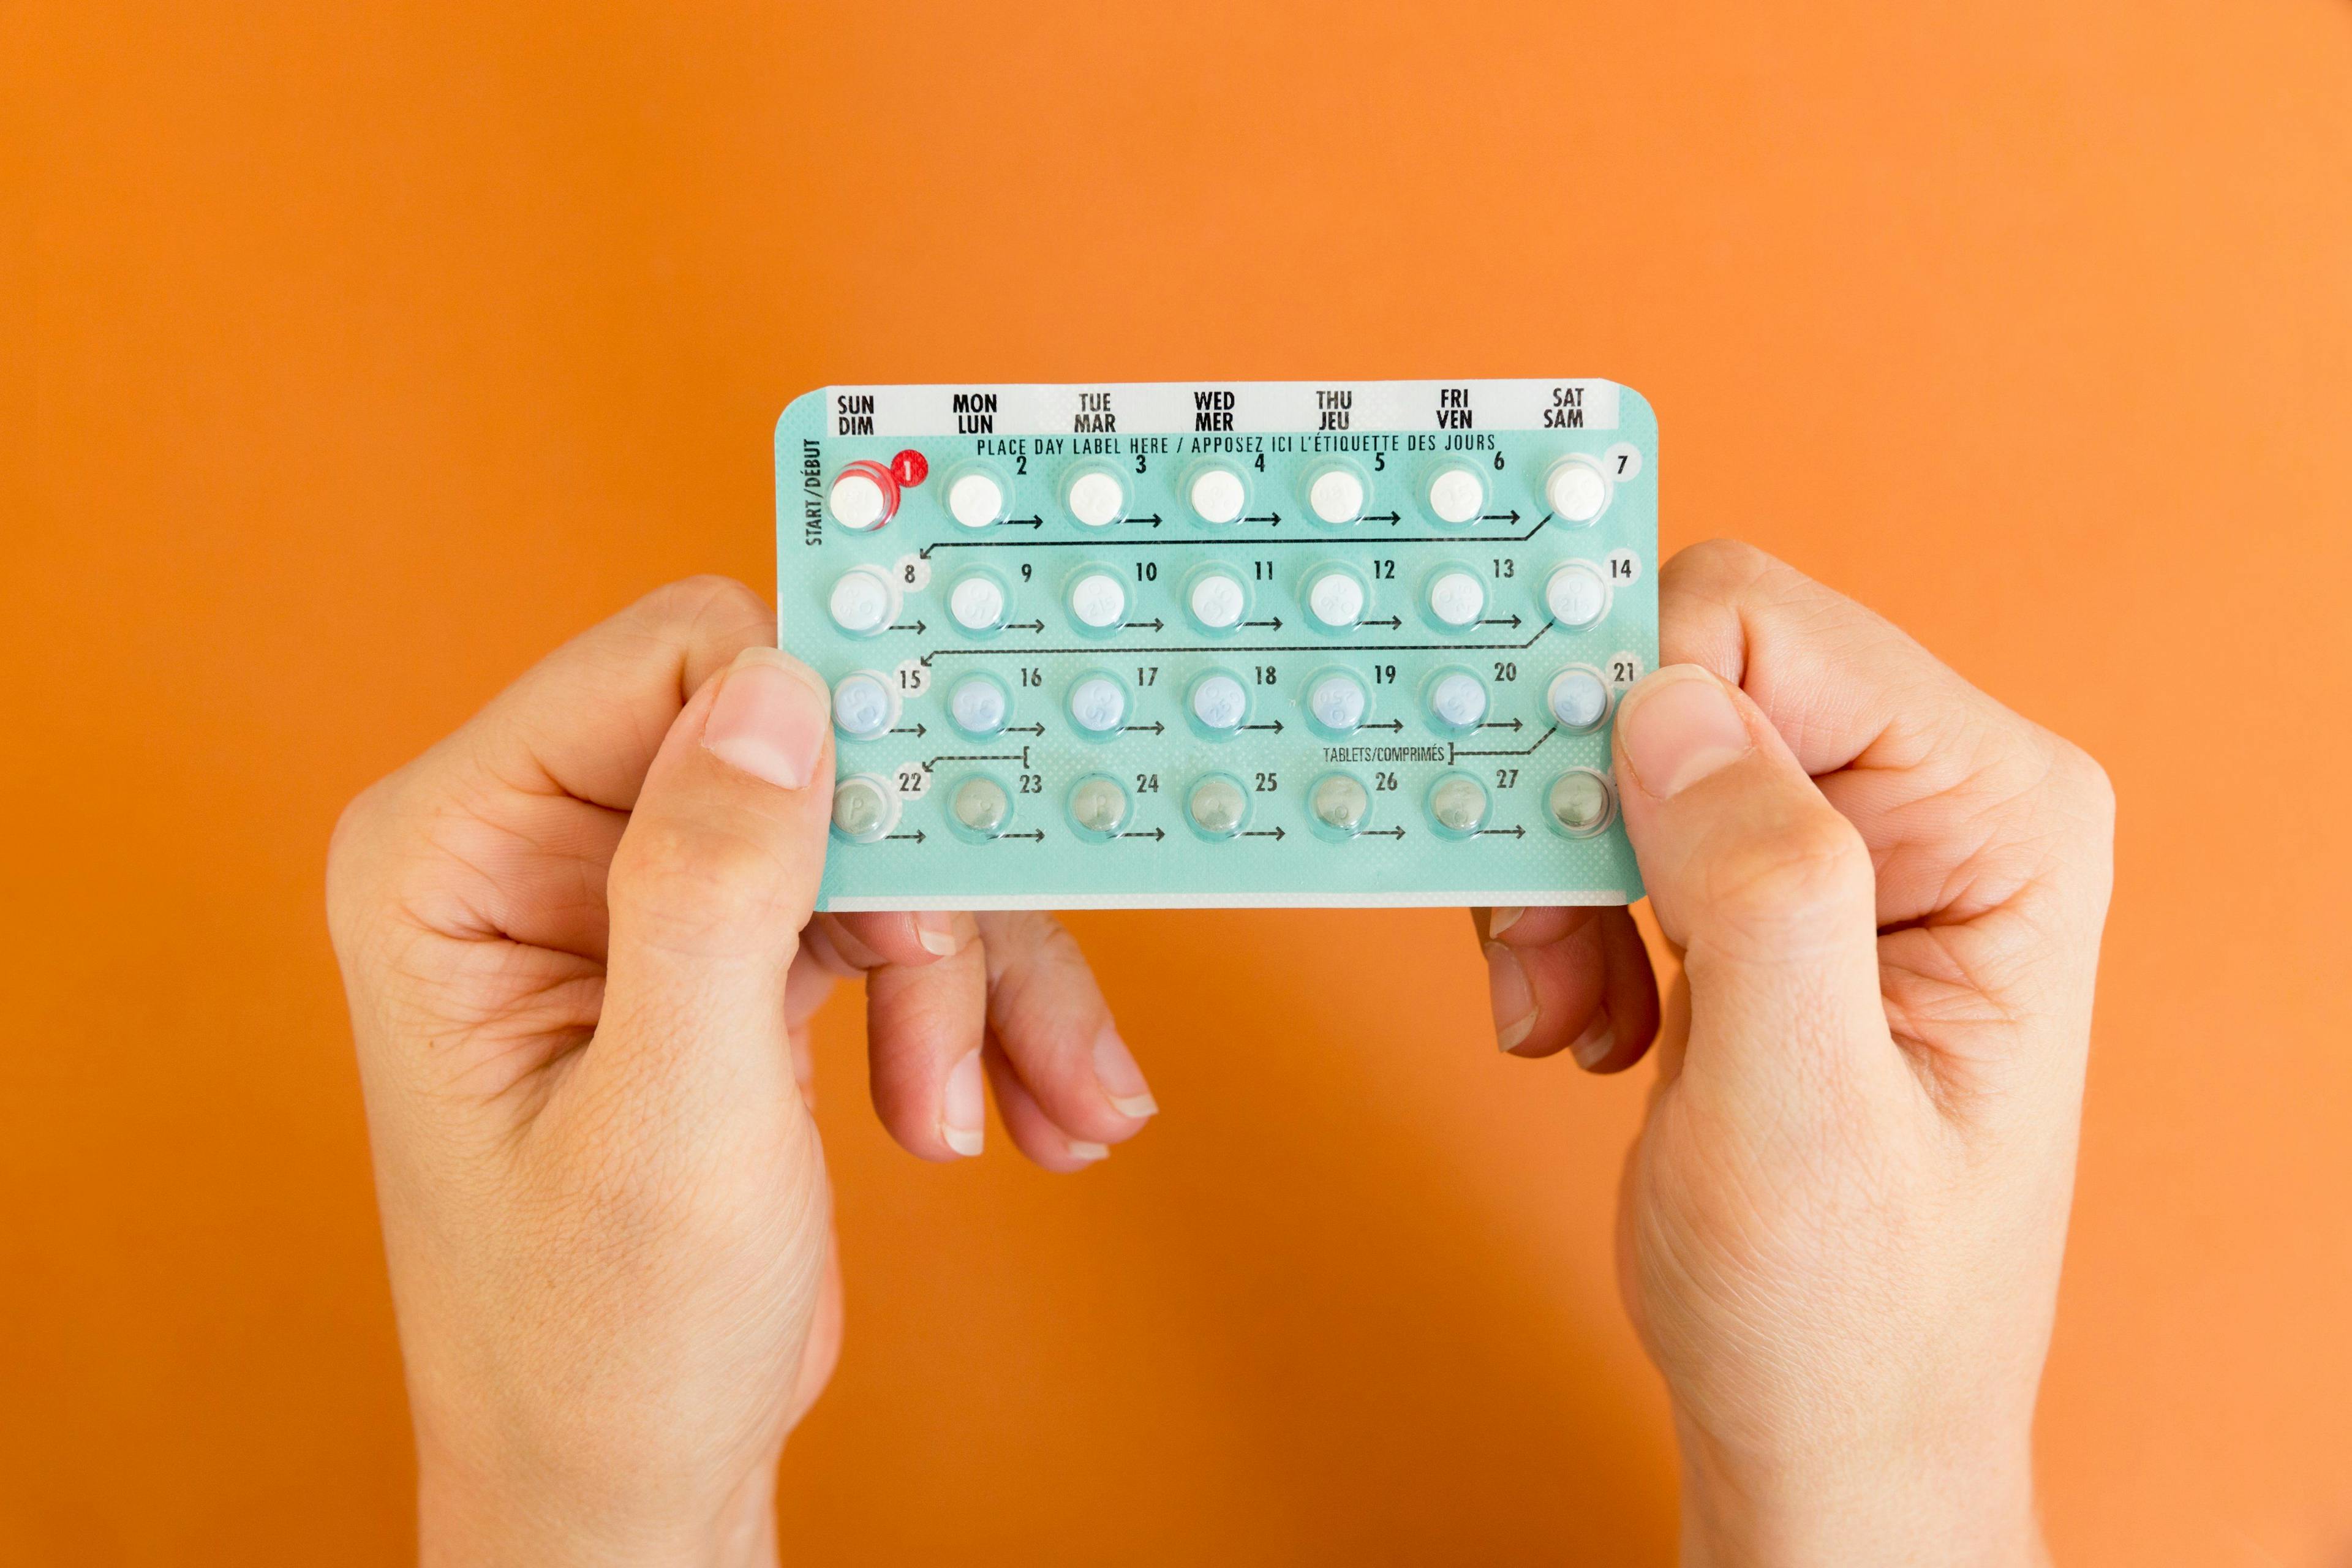 Now is the time for over-the-counter hormonal contraception